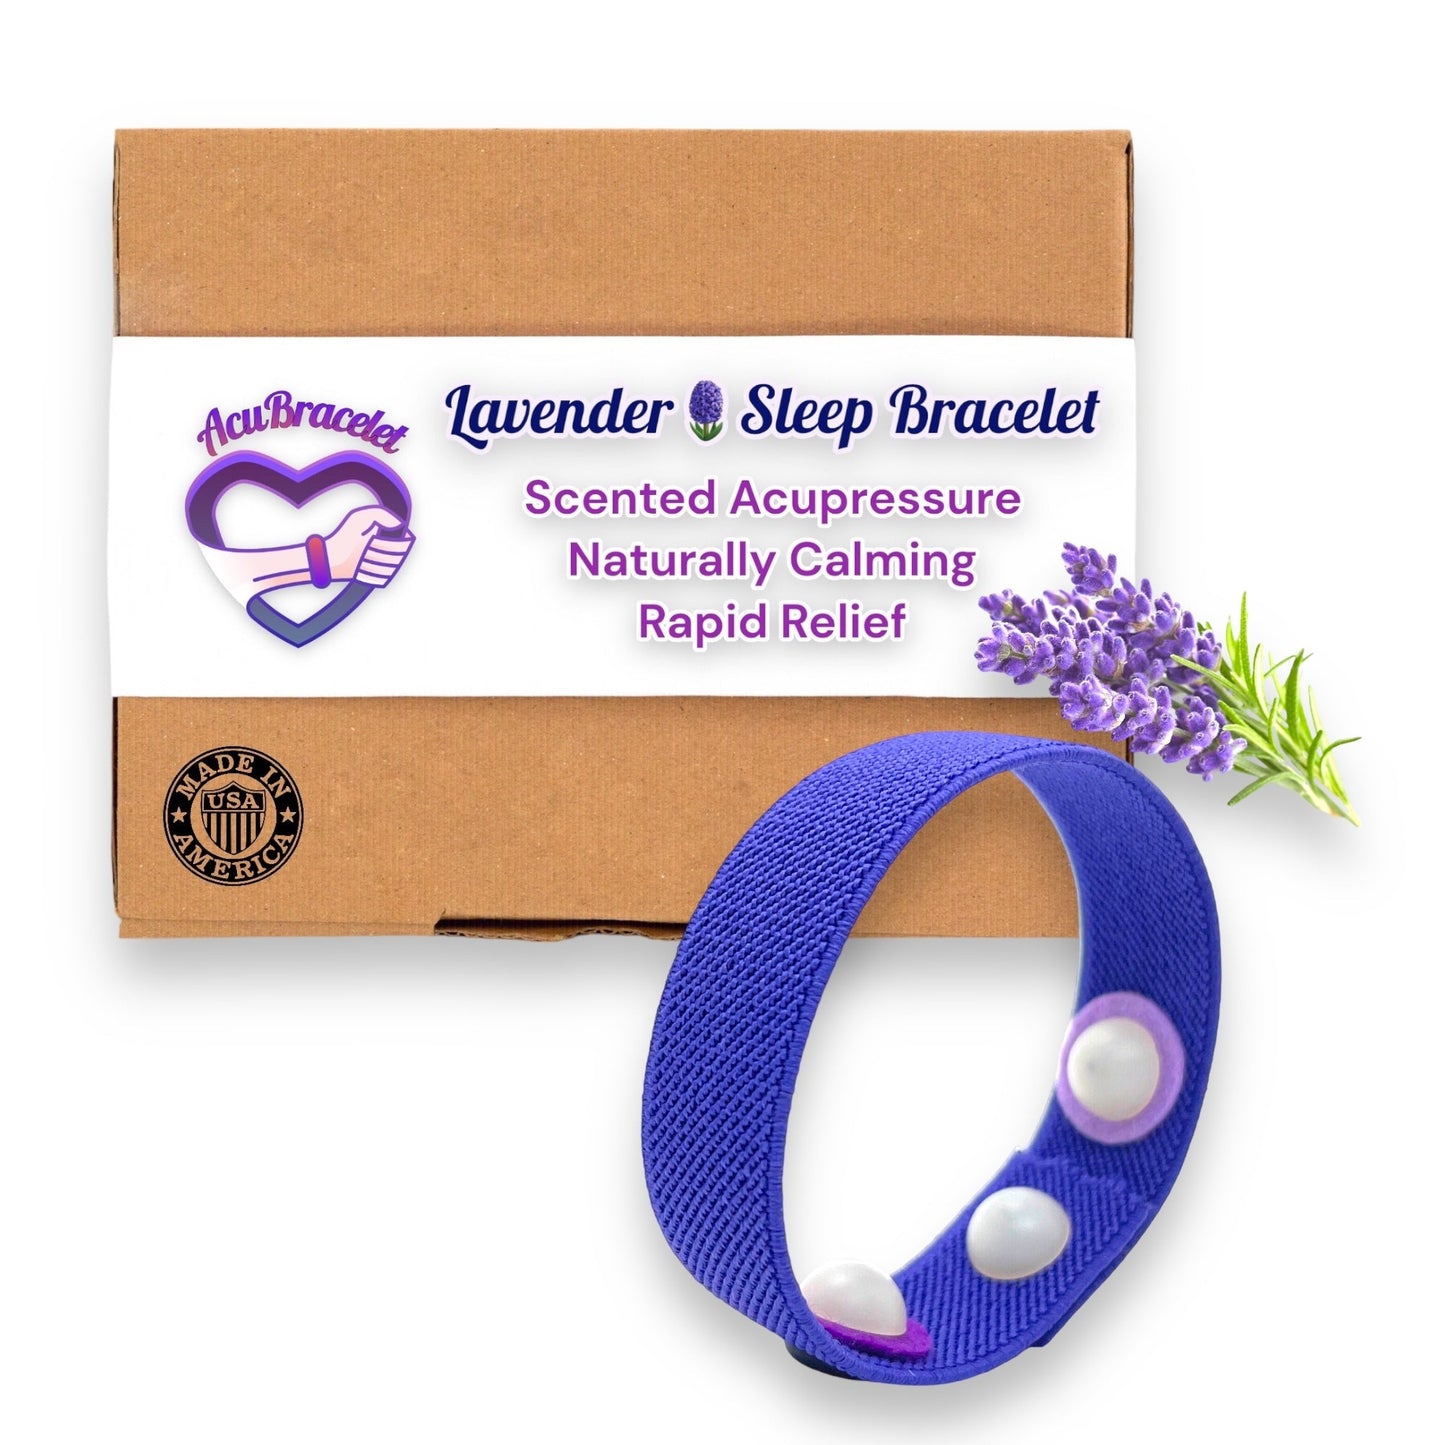 Lavender Sleep Bracelet for Insomnia and Sleep Issues-Calming Acupressure-Anxiety Relief-3 Acupressure Bead Multi Symptom Design-Natural Relaxation-Coping Strategy - Acupressure Bracelets